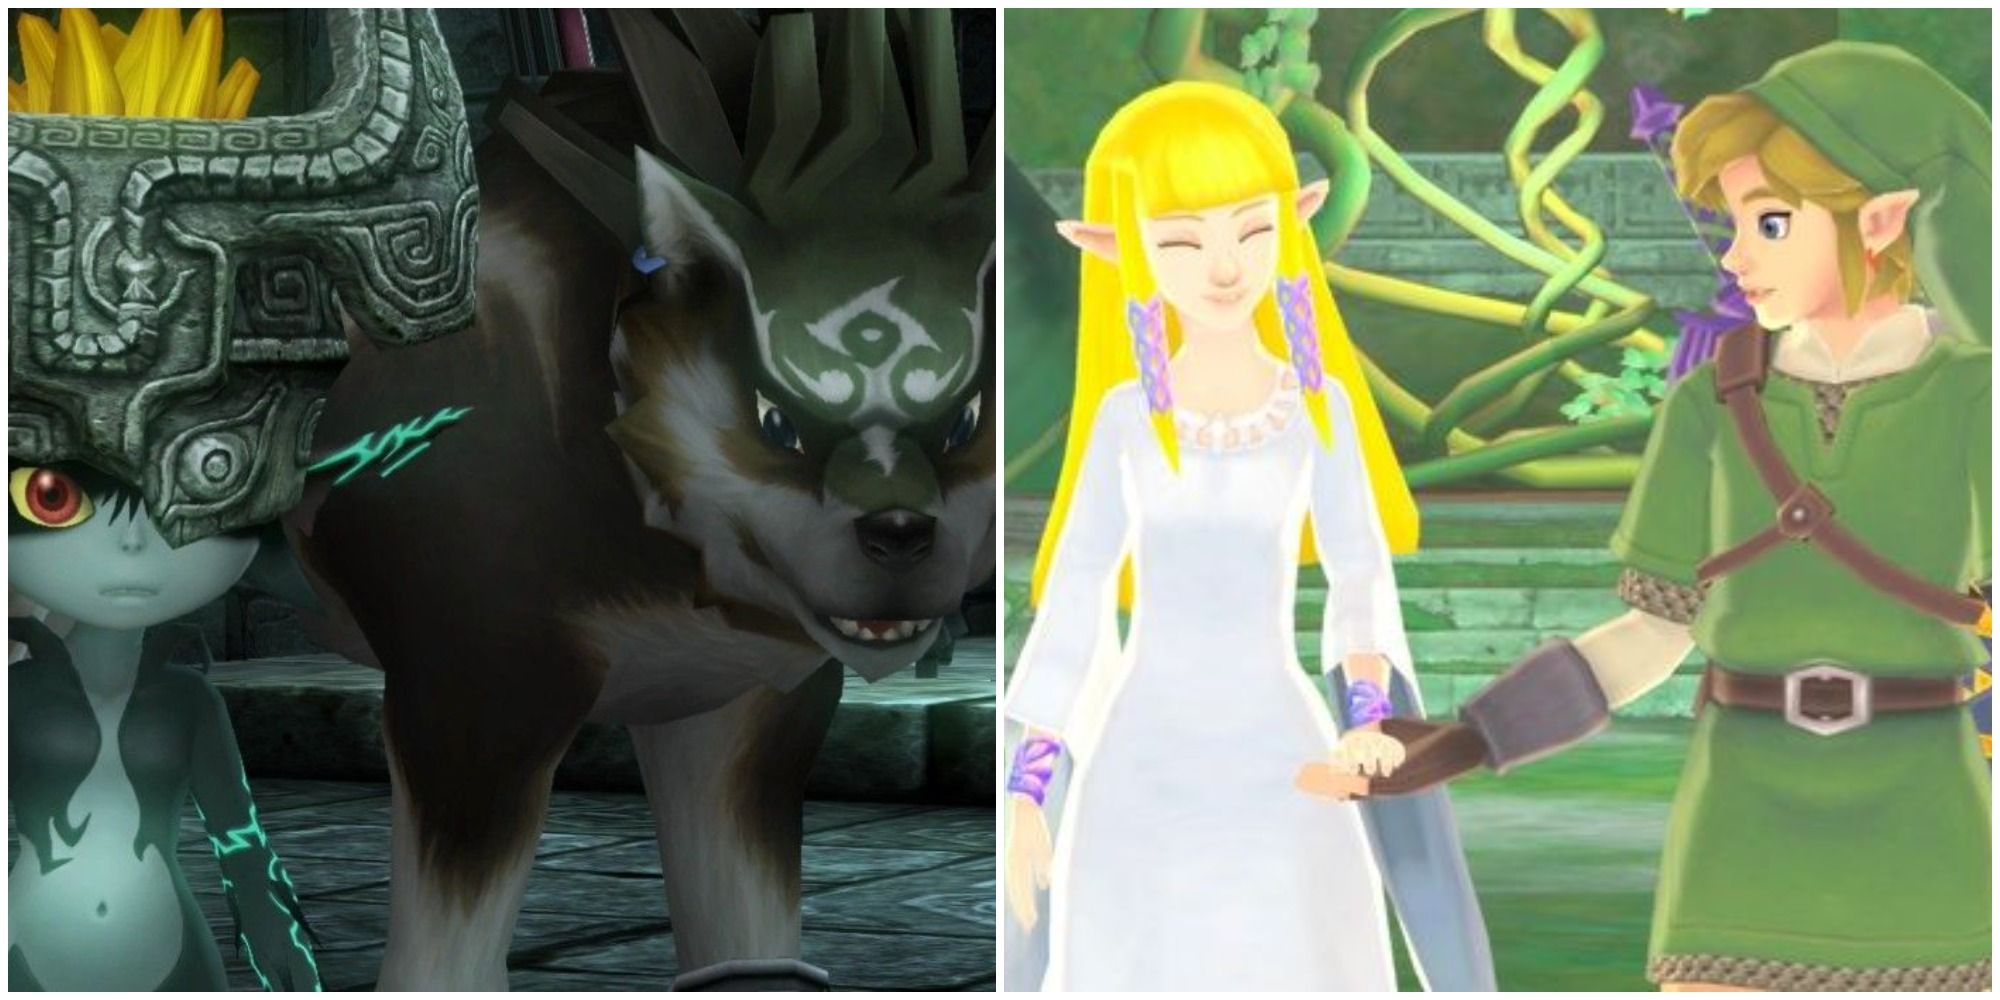 Twilight Princess vs Skyward Sword split image - on the left, midna in her imp form with wolf link, on the right, zelda and link in skyward sword 